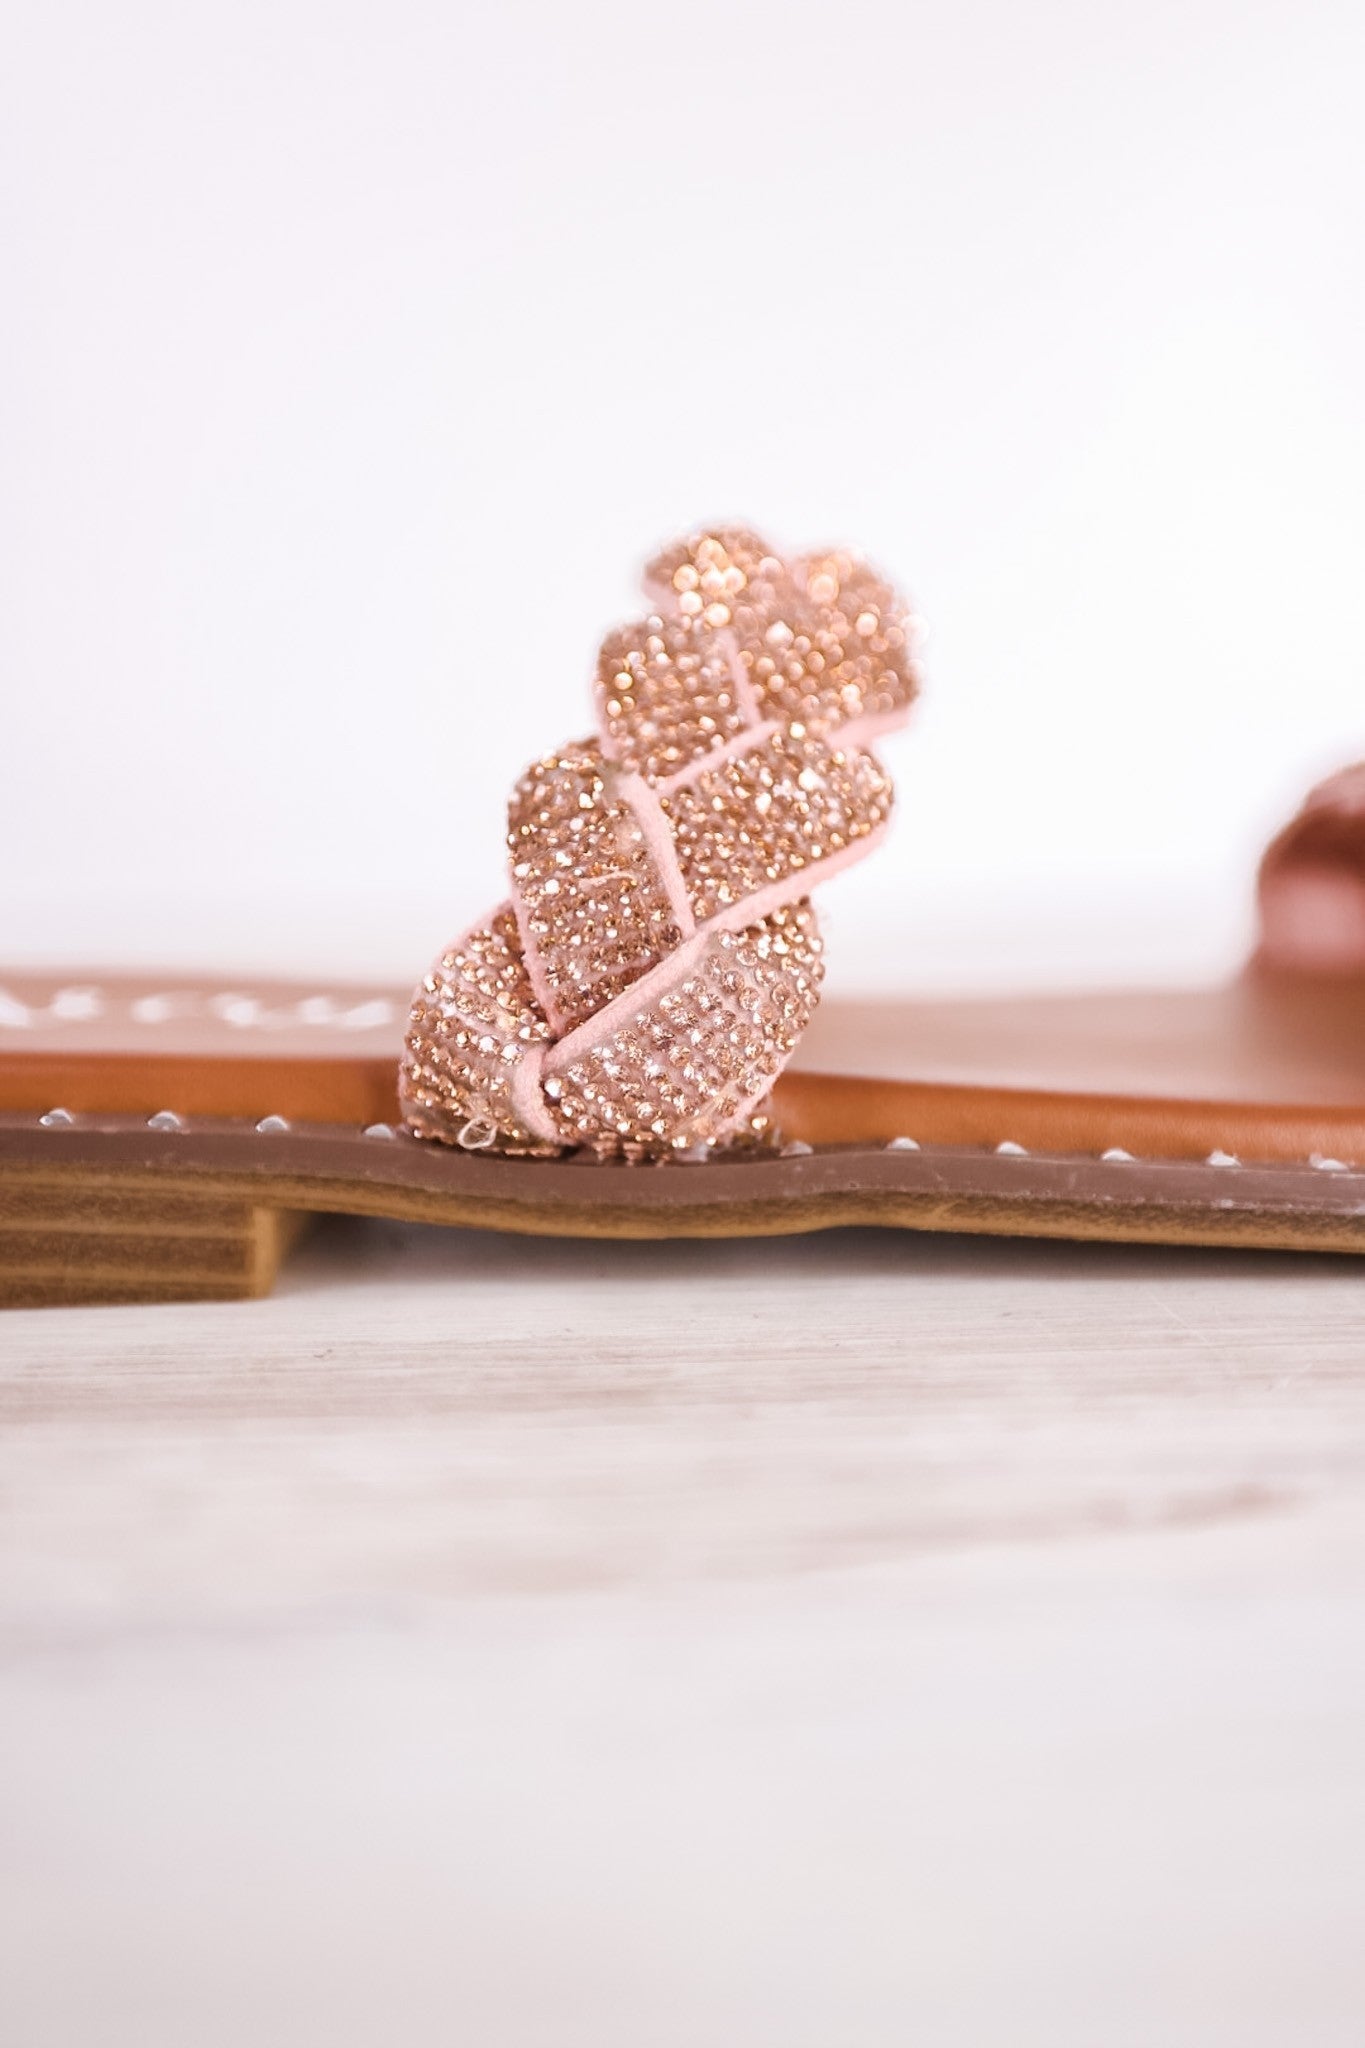 Twisty Rose Gold Sandals - Whiskey Skies